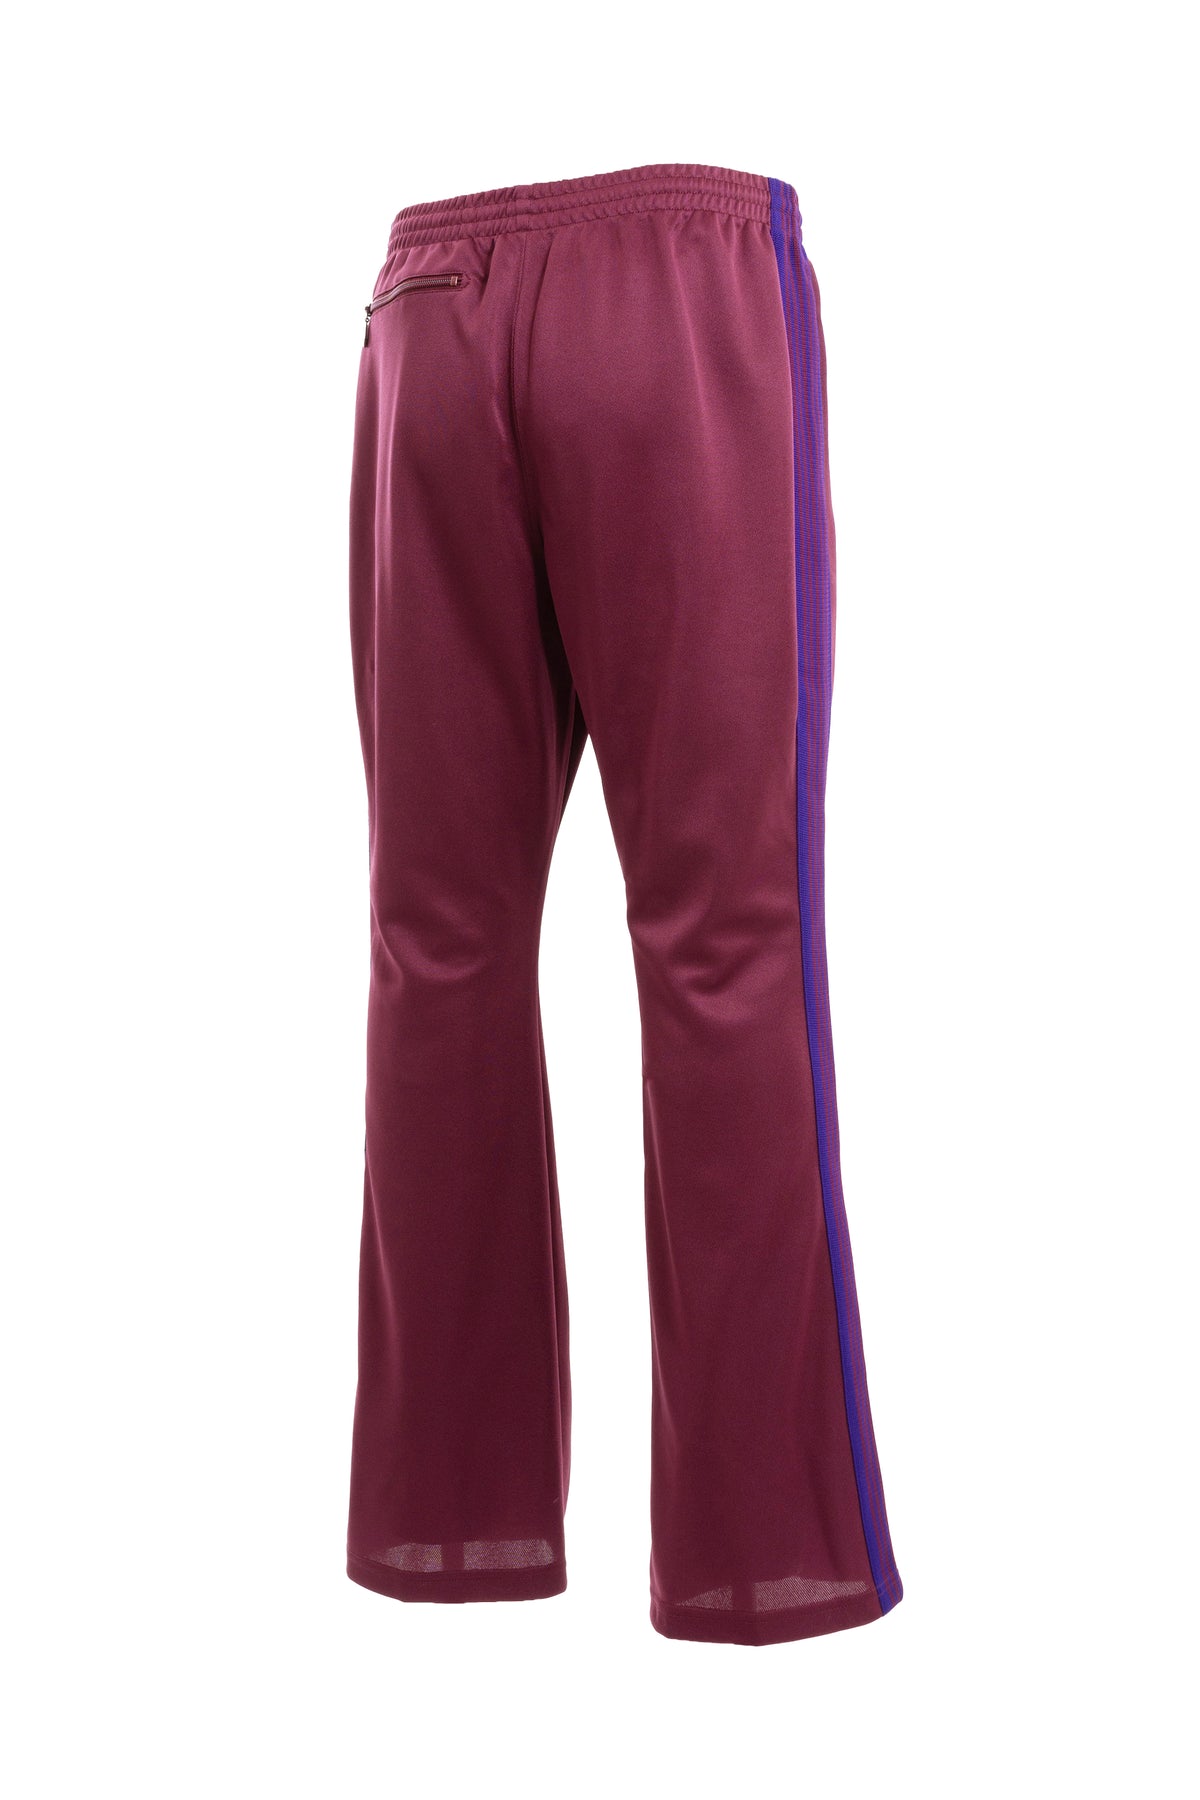 BOOT-CUT TRACK PANT - POLY SMOOTH / WINE